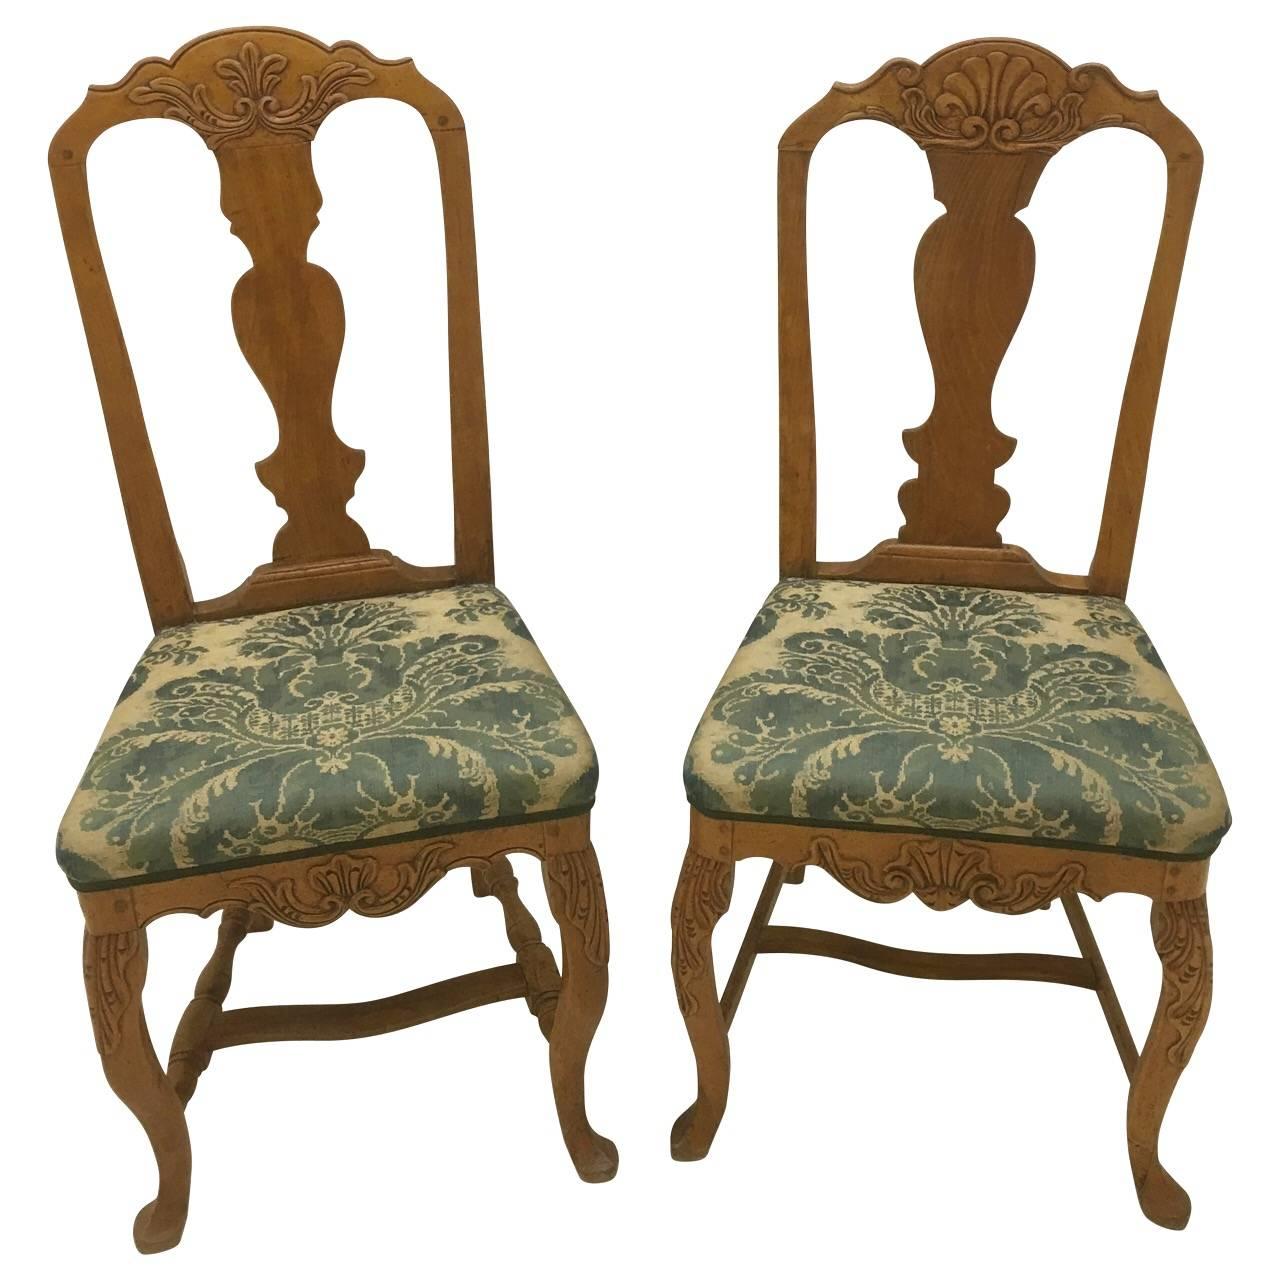 Great pair of original 18th Century Rococo chairs.